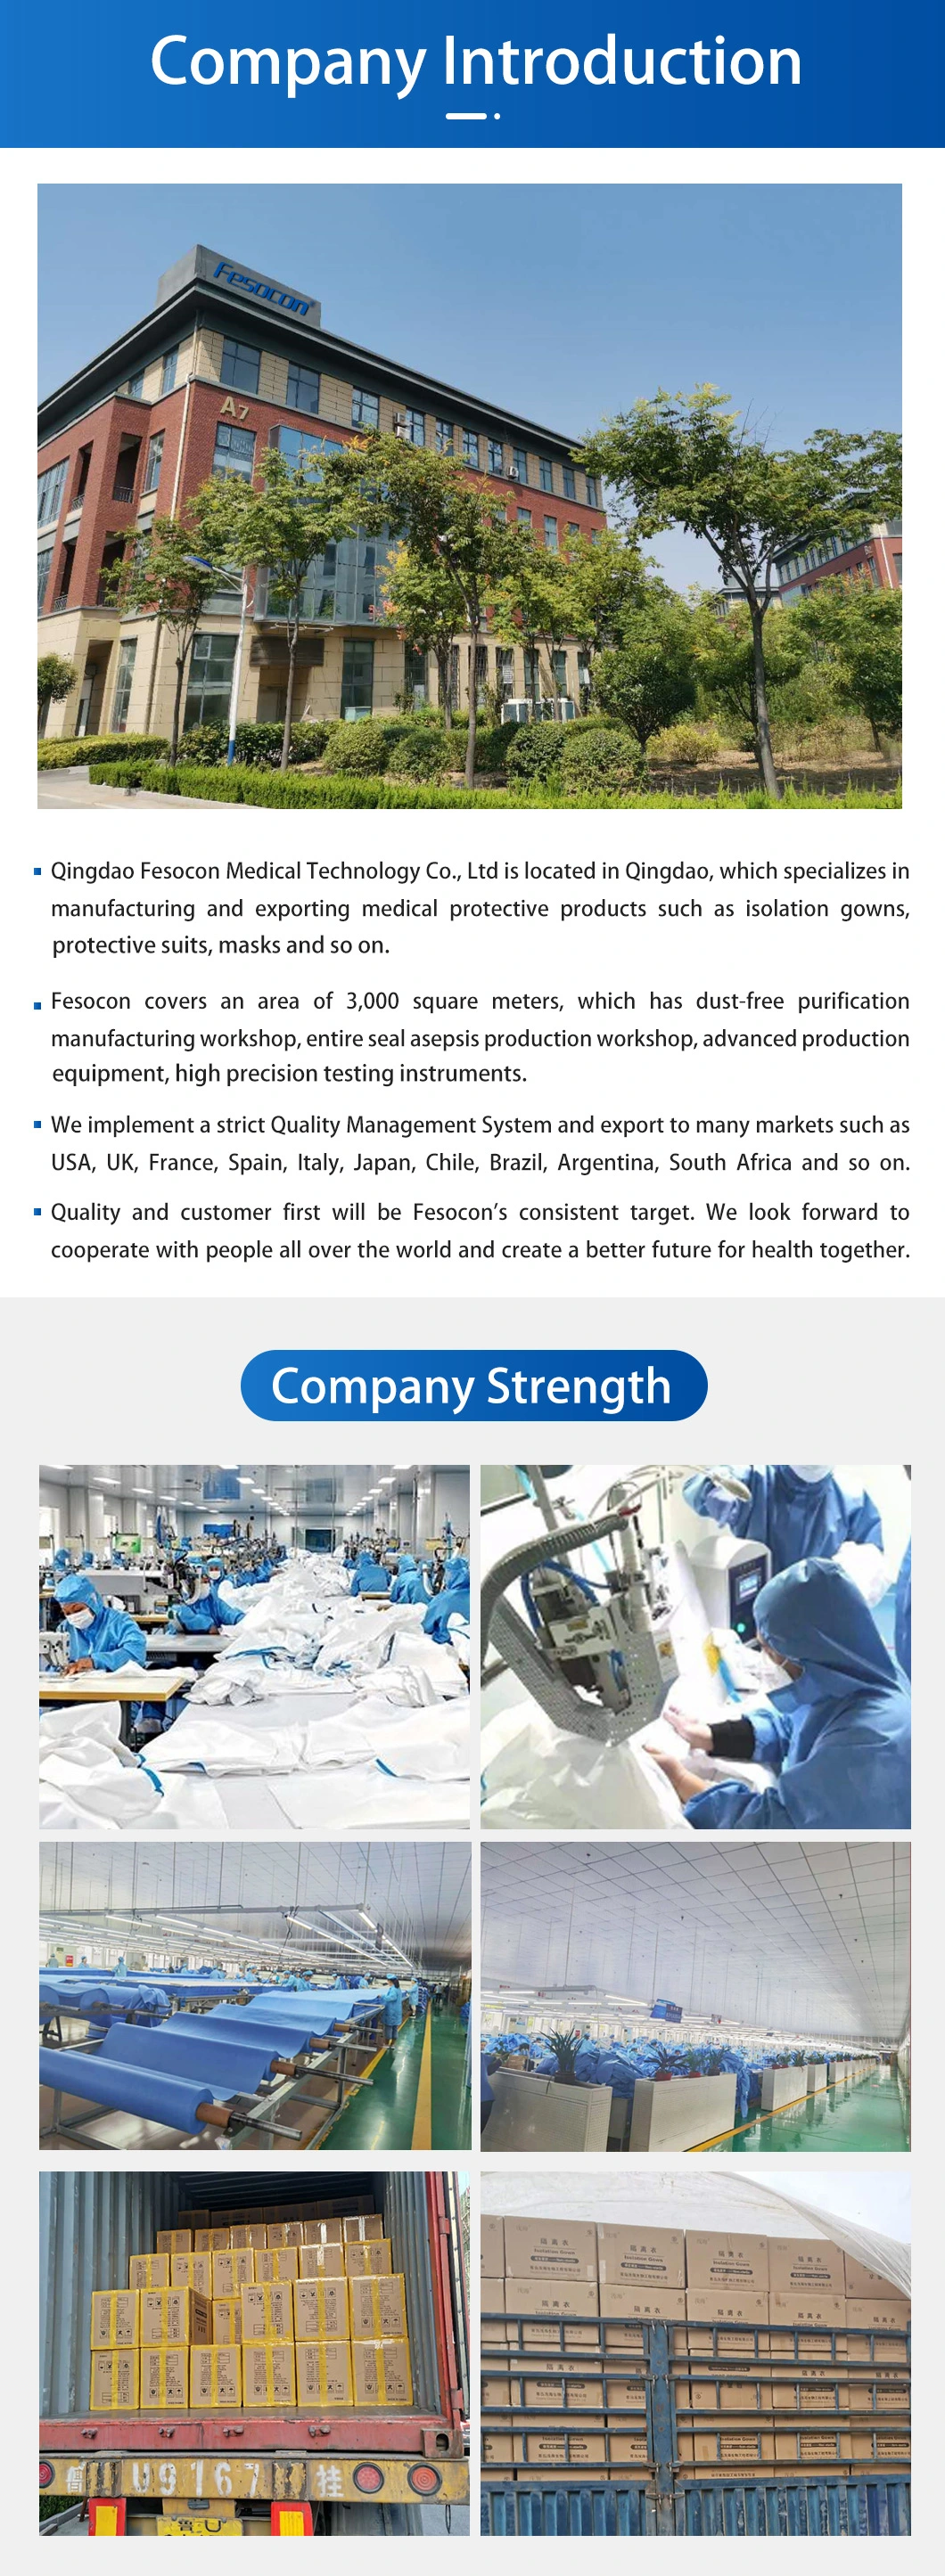 Factory FDA Registration Non Woven Disposable White Hooded Isolation Gown